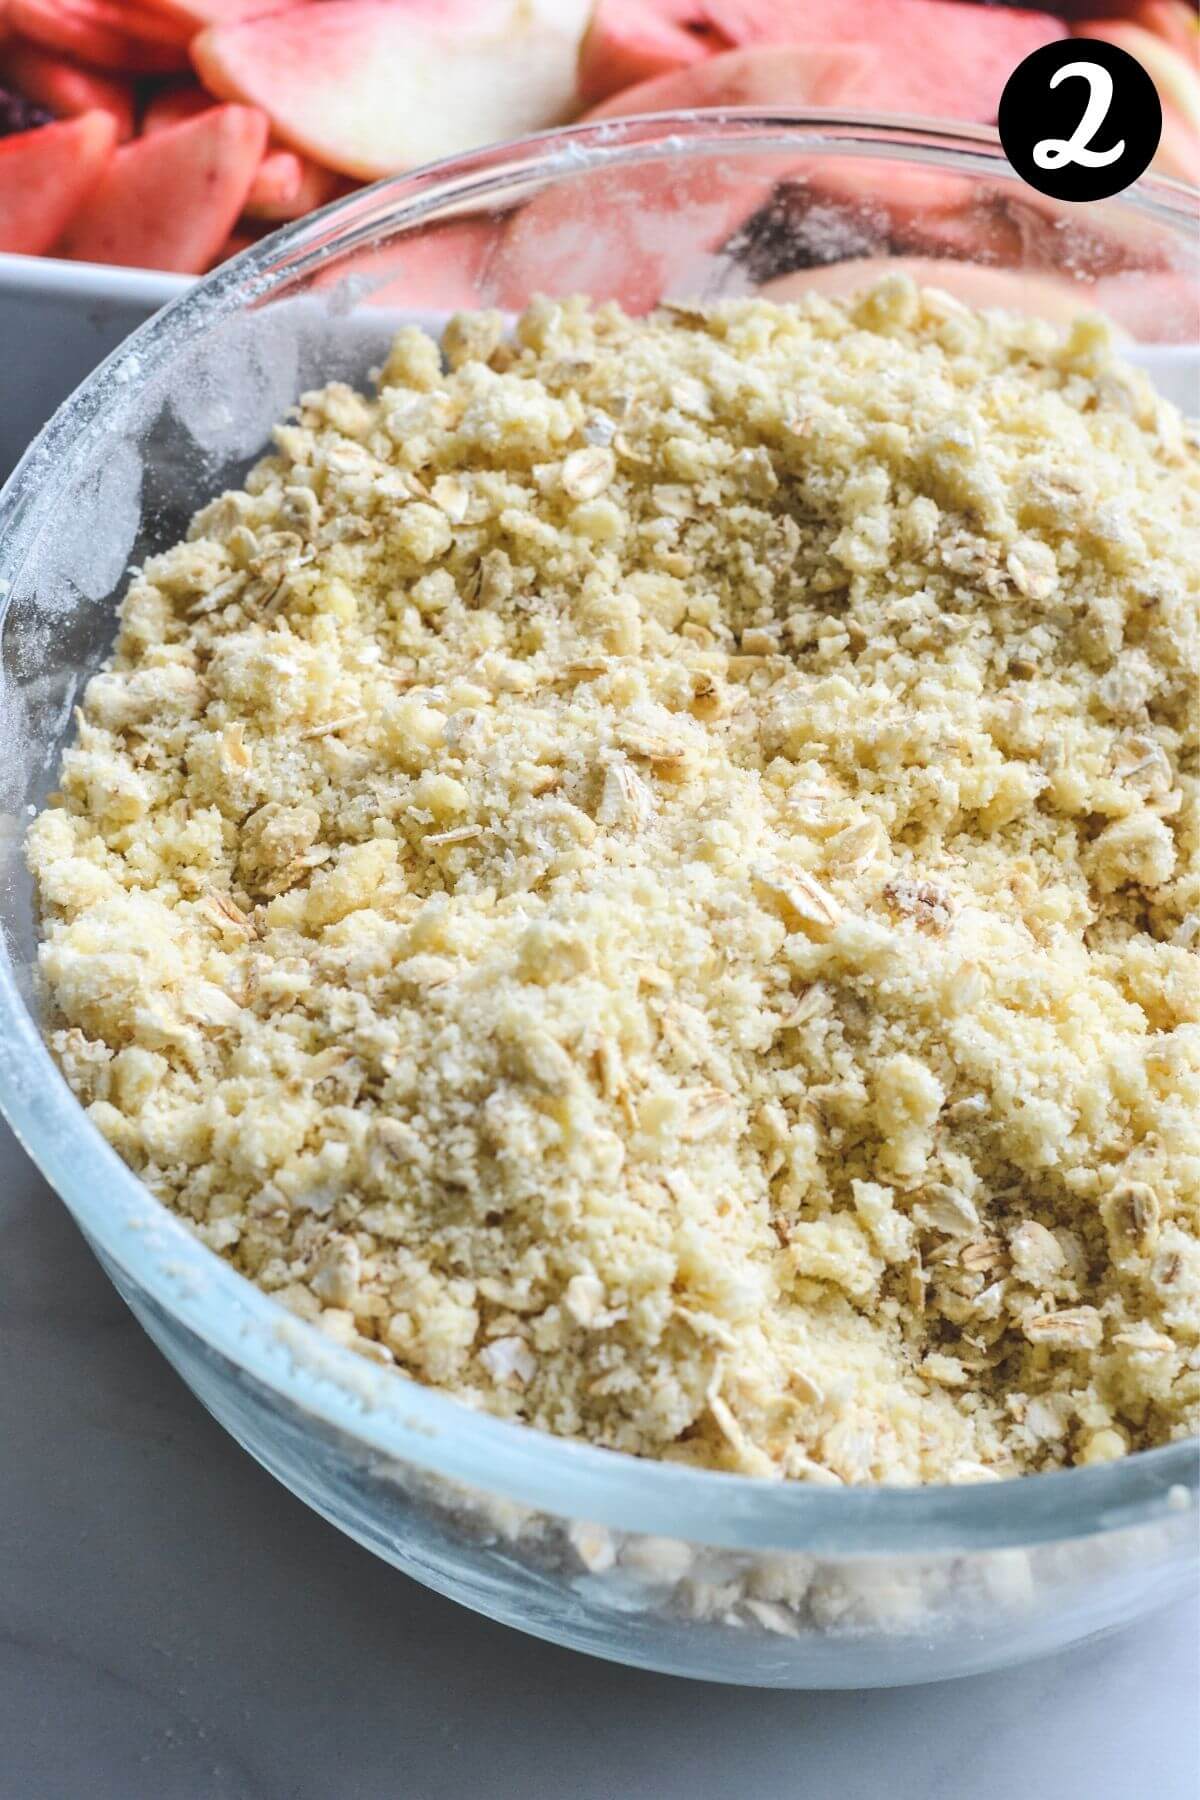 crumble mixture in a glass bowl